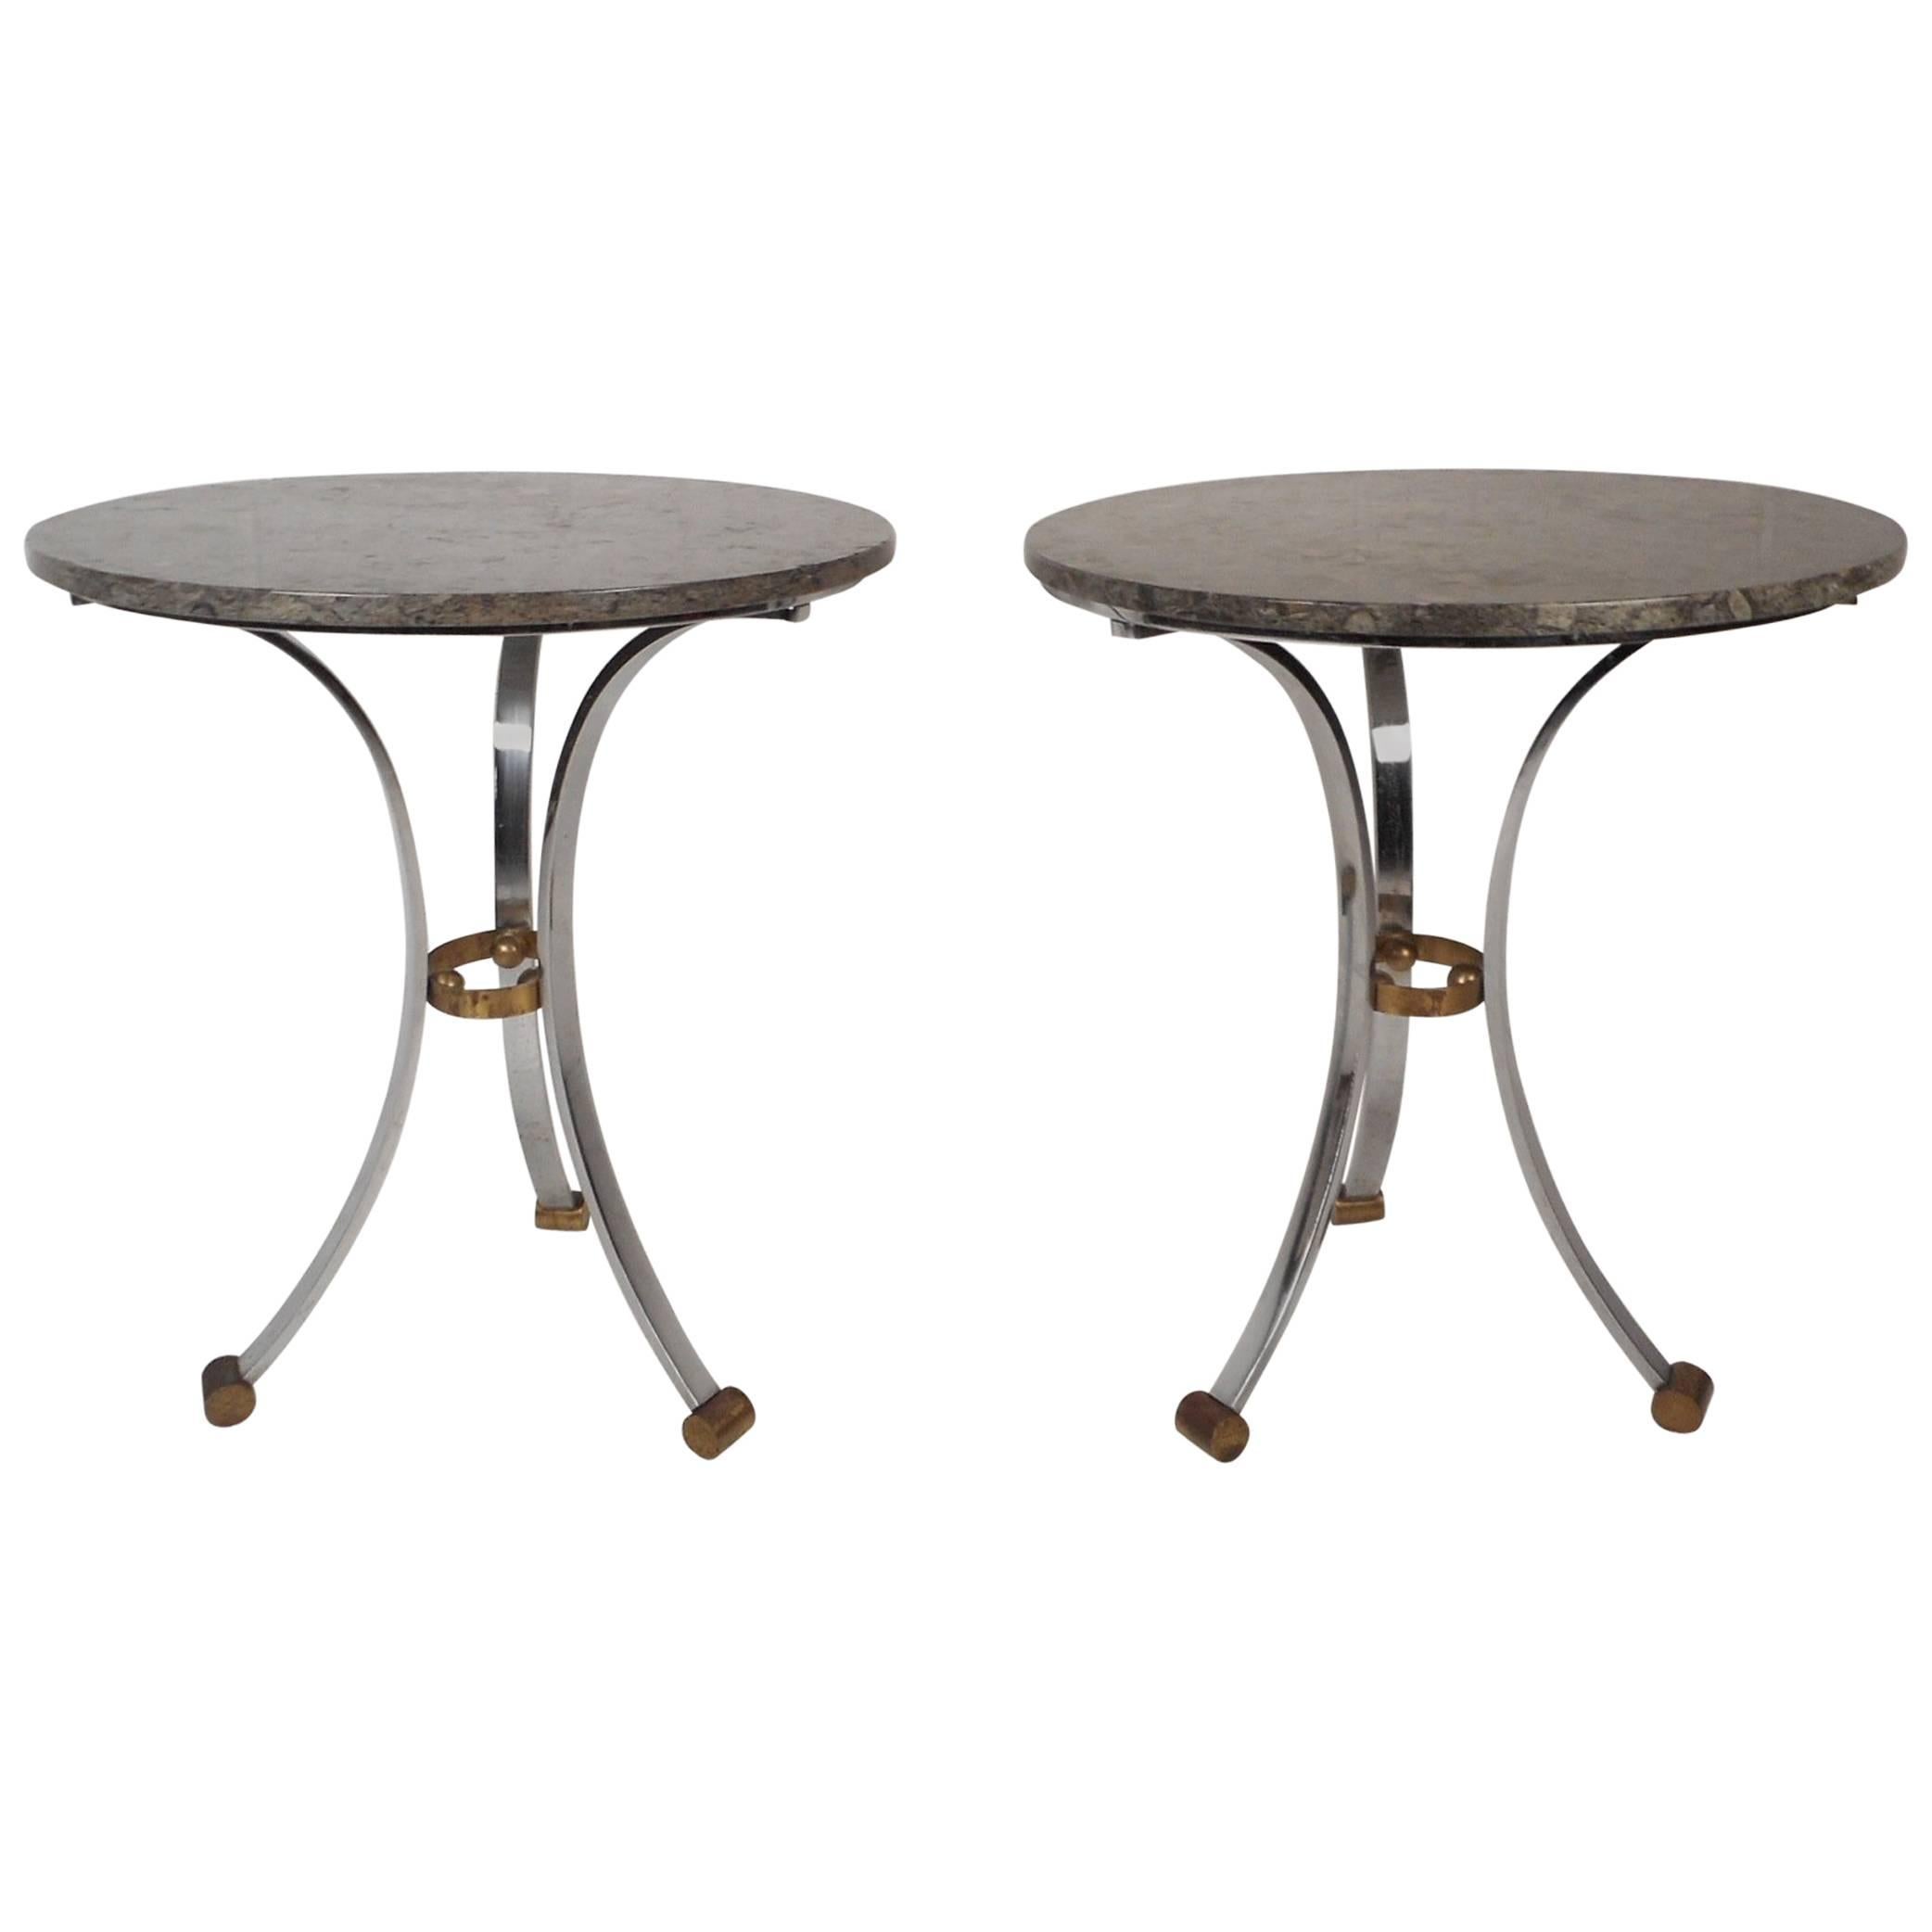 Pair of Mid-Century Modern End Tables with a Marble Top